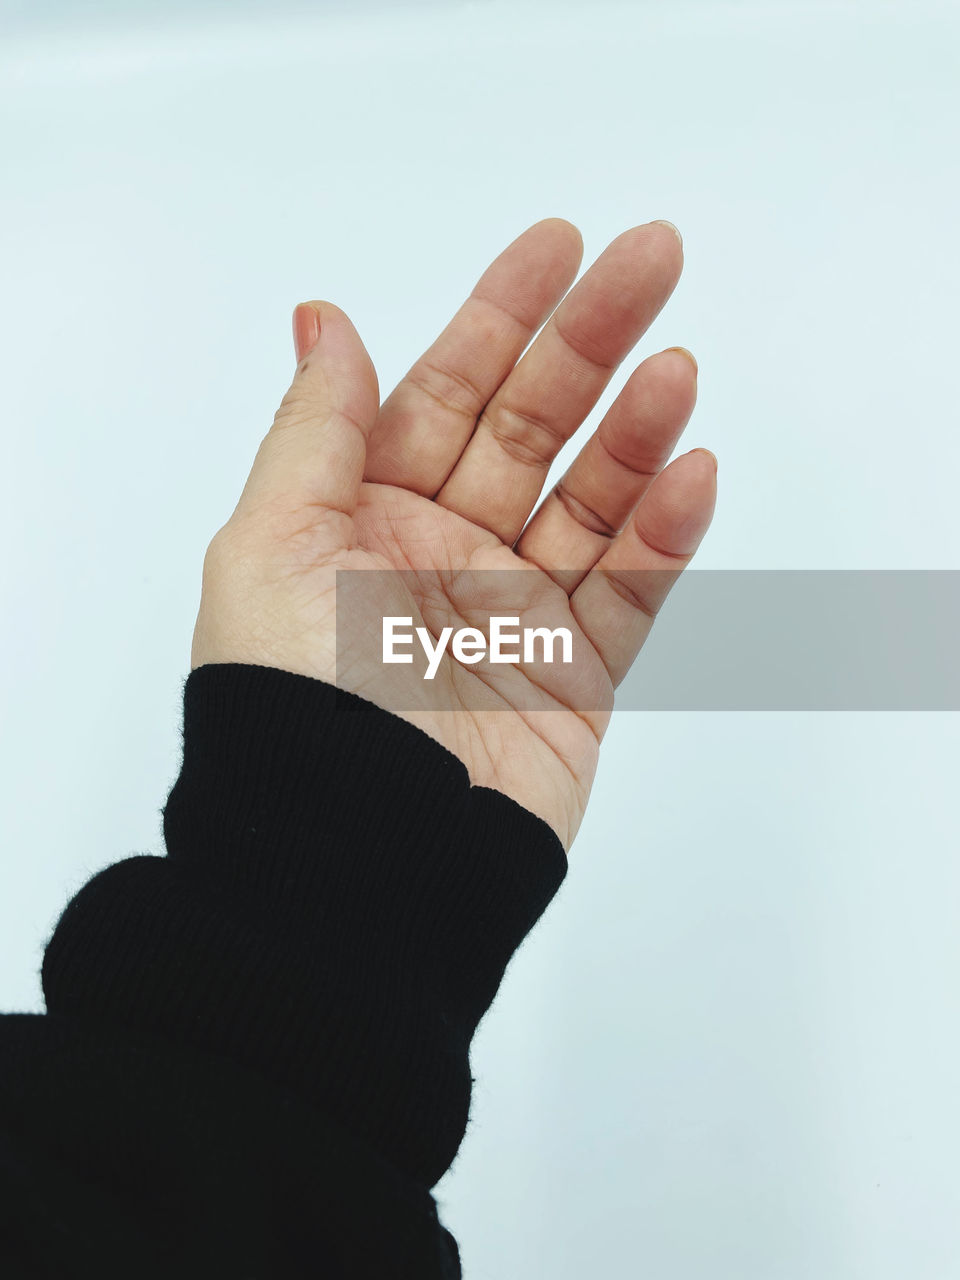 Cropped hand gesturing against white background